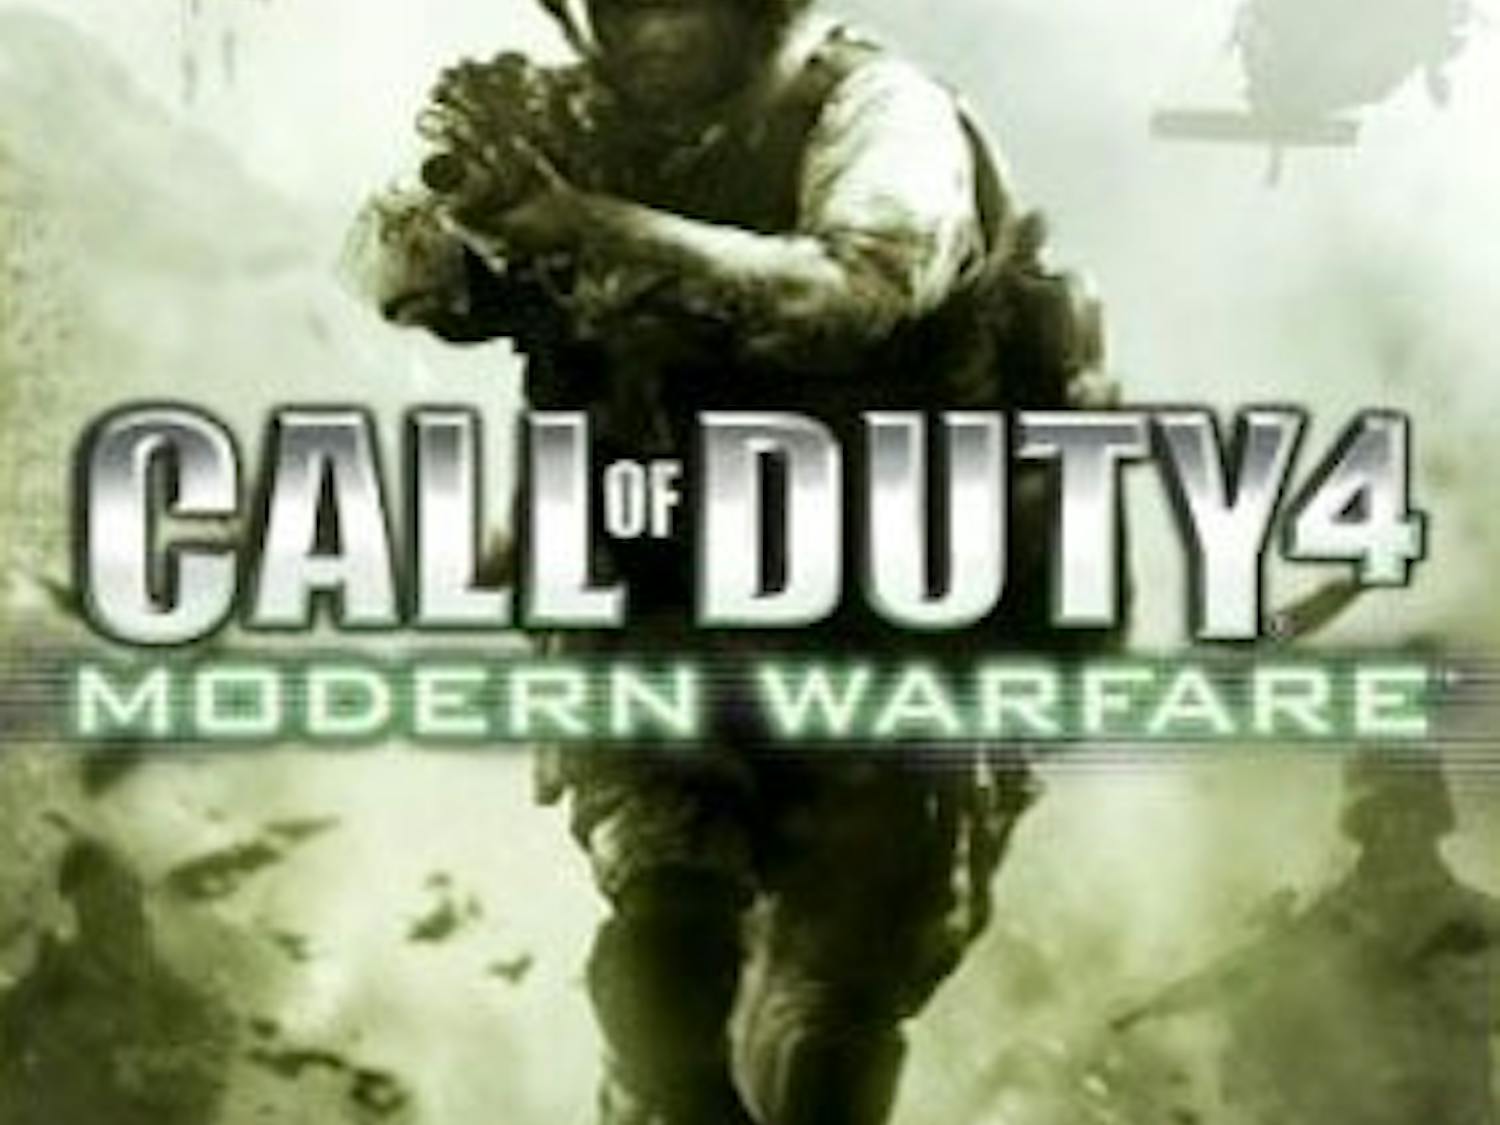 'Call of Duty 4' an authentic experience of modern warfare